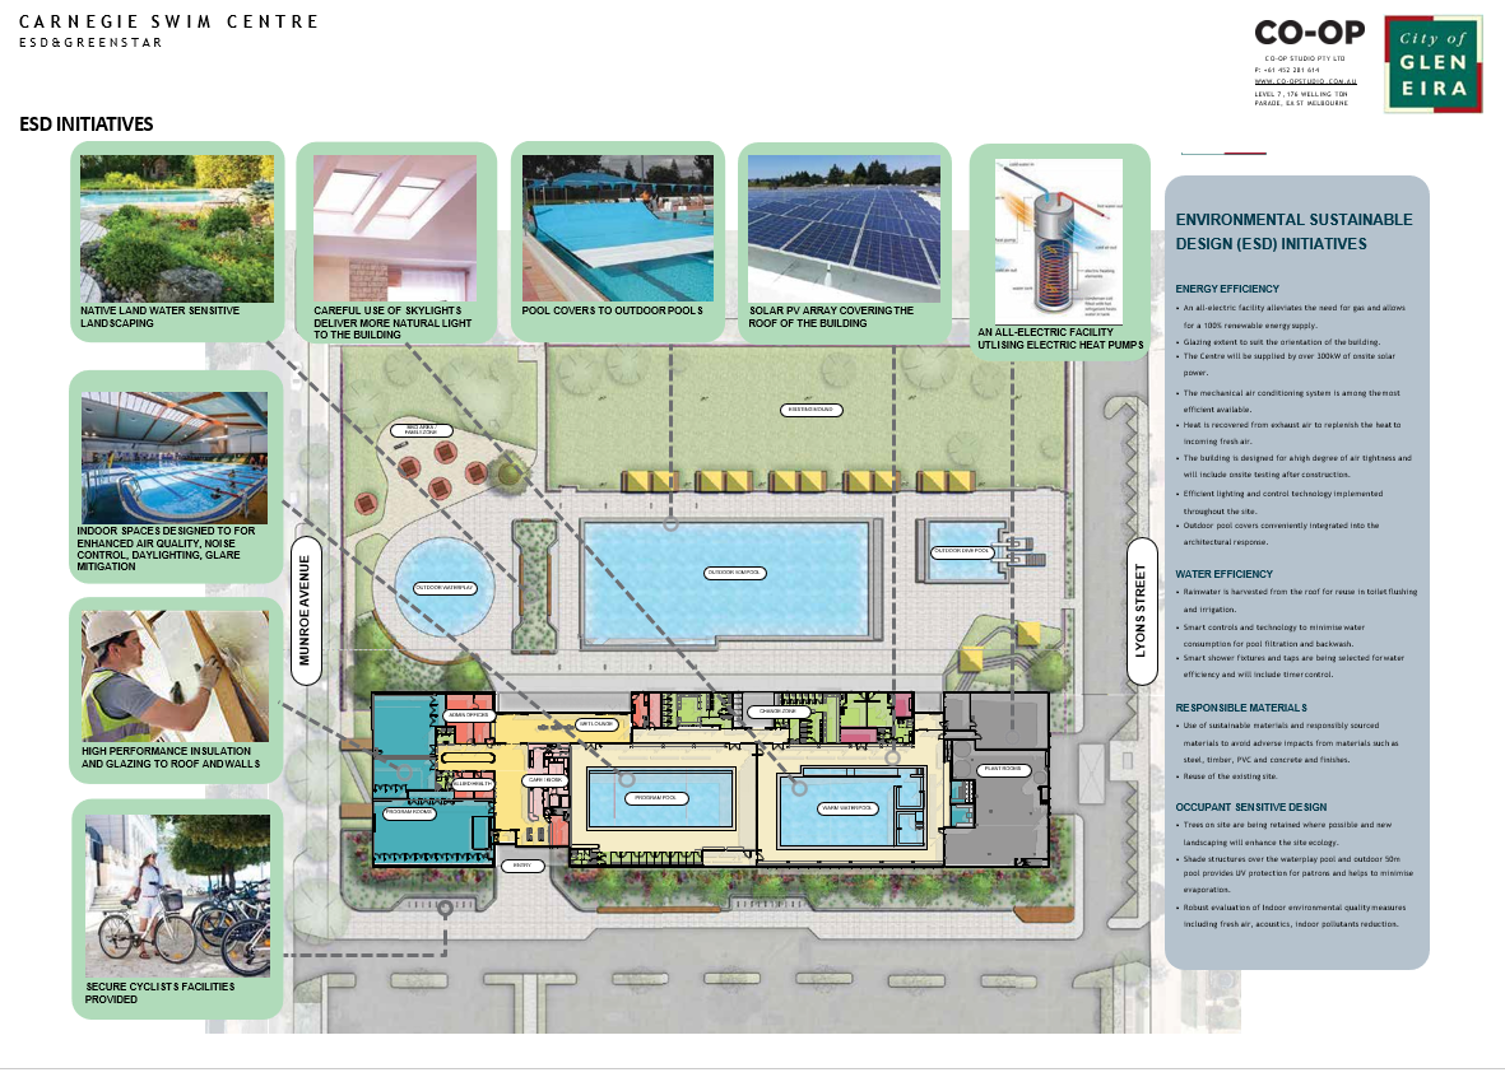 A drawing of the Carnegie Swim Centre showing the environmental sustainability initiatives